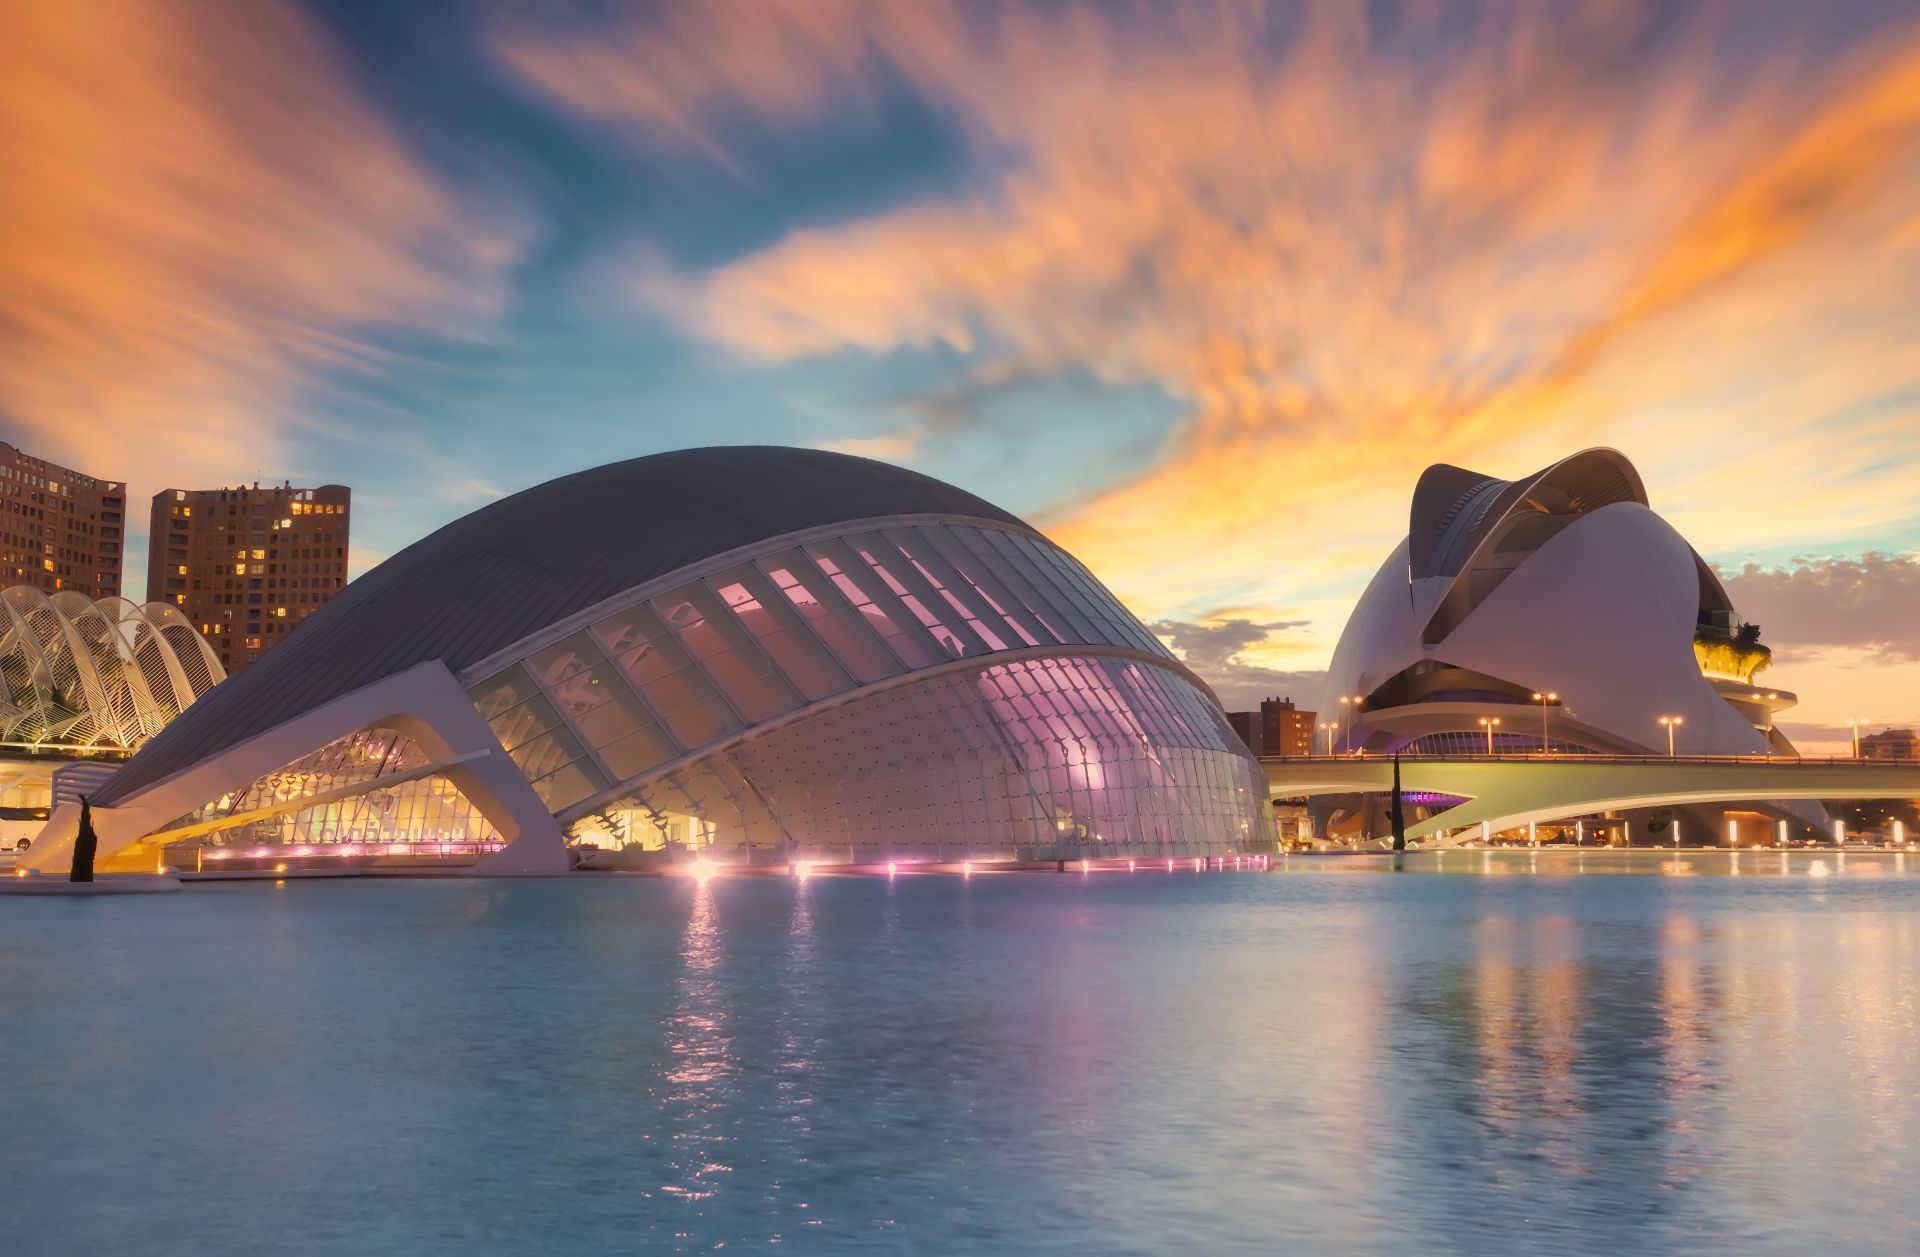 beautiful sunset in the famous city of arts and sciences